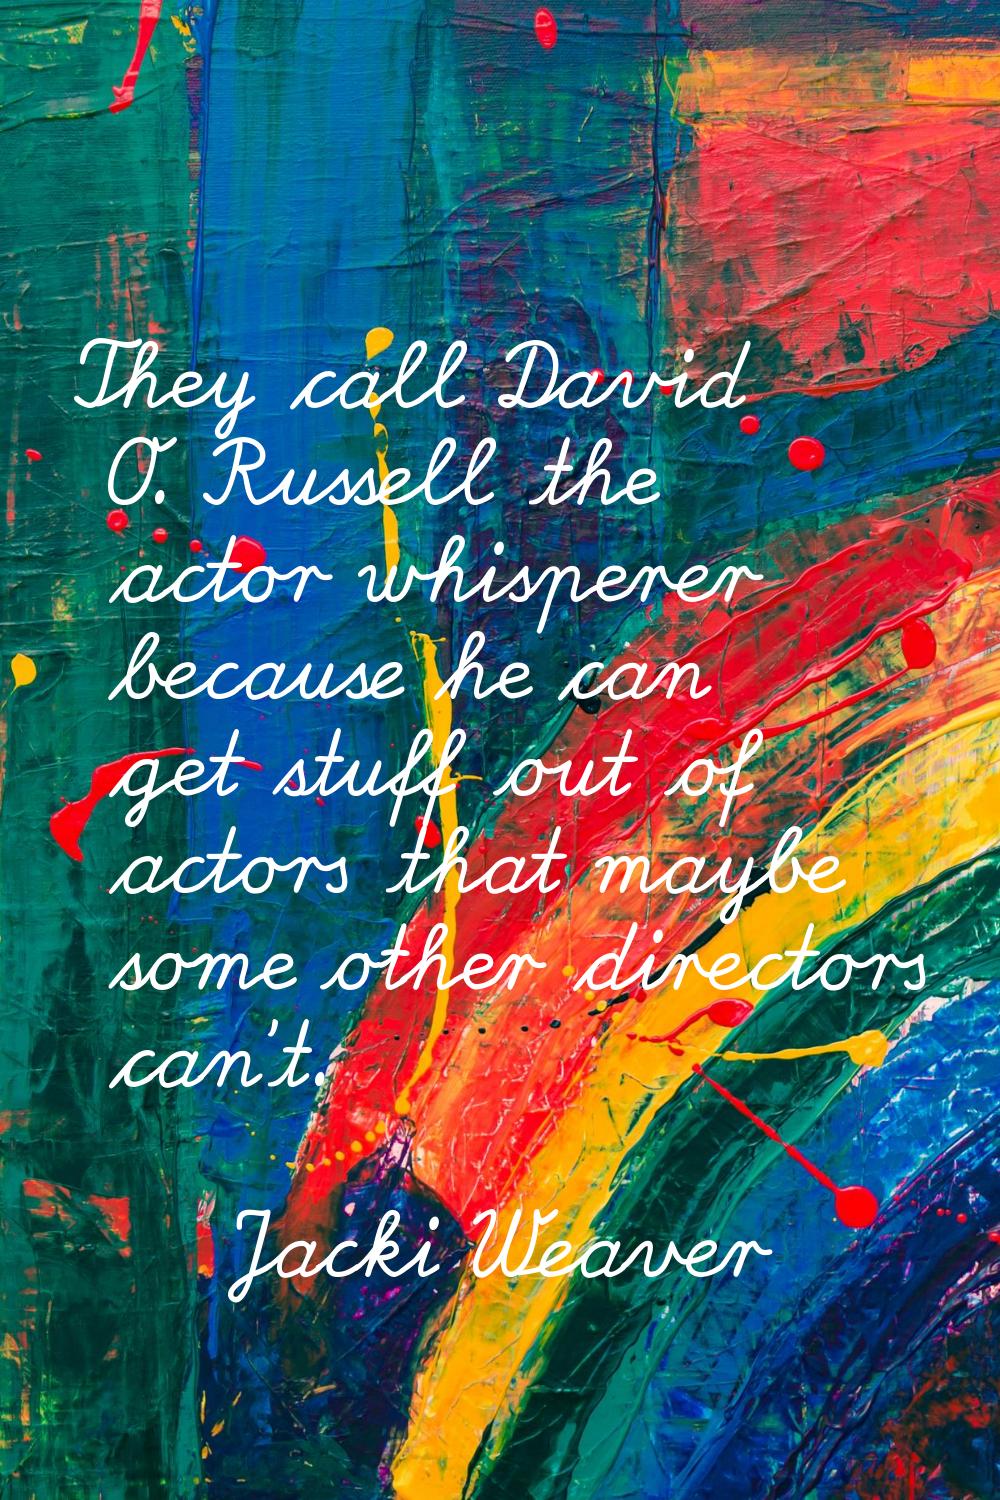 They call David O. Russell the actor whisperer because he can get stuff out of actors that maybe so